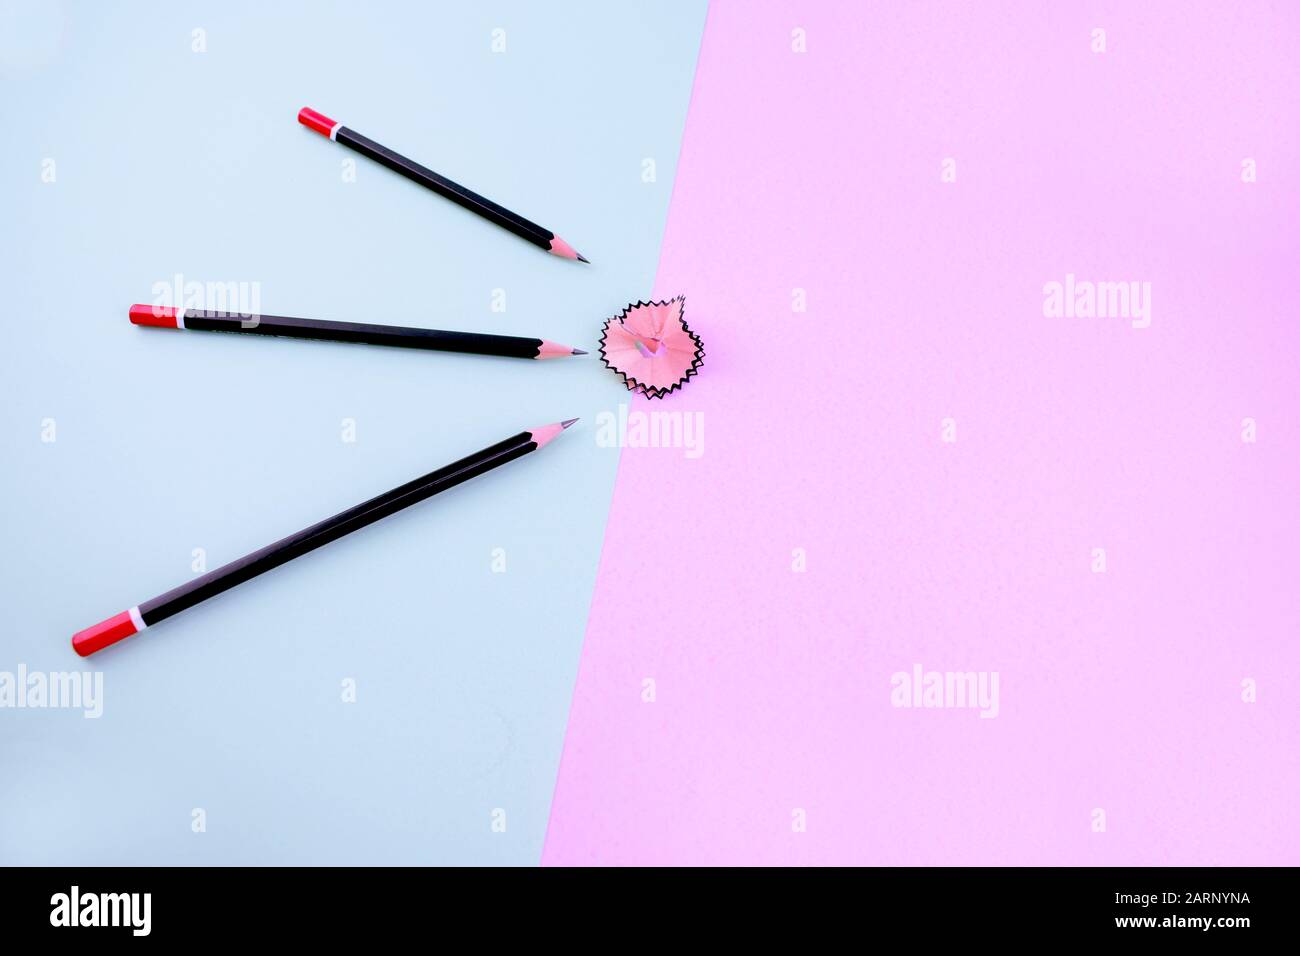 three dark black sharpened pencils over a light blue background are pointing at a pink pencil shaving which on a pink paper background Stock Photo